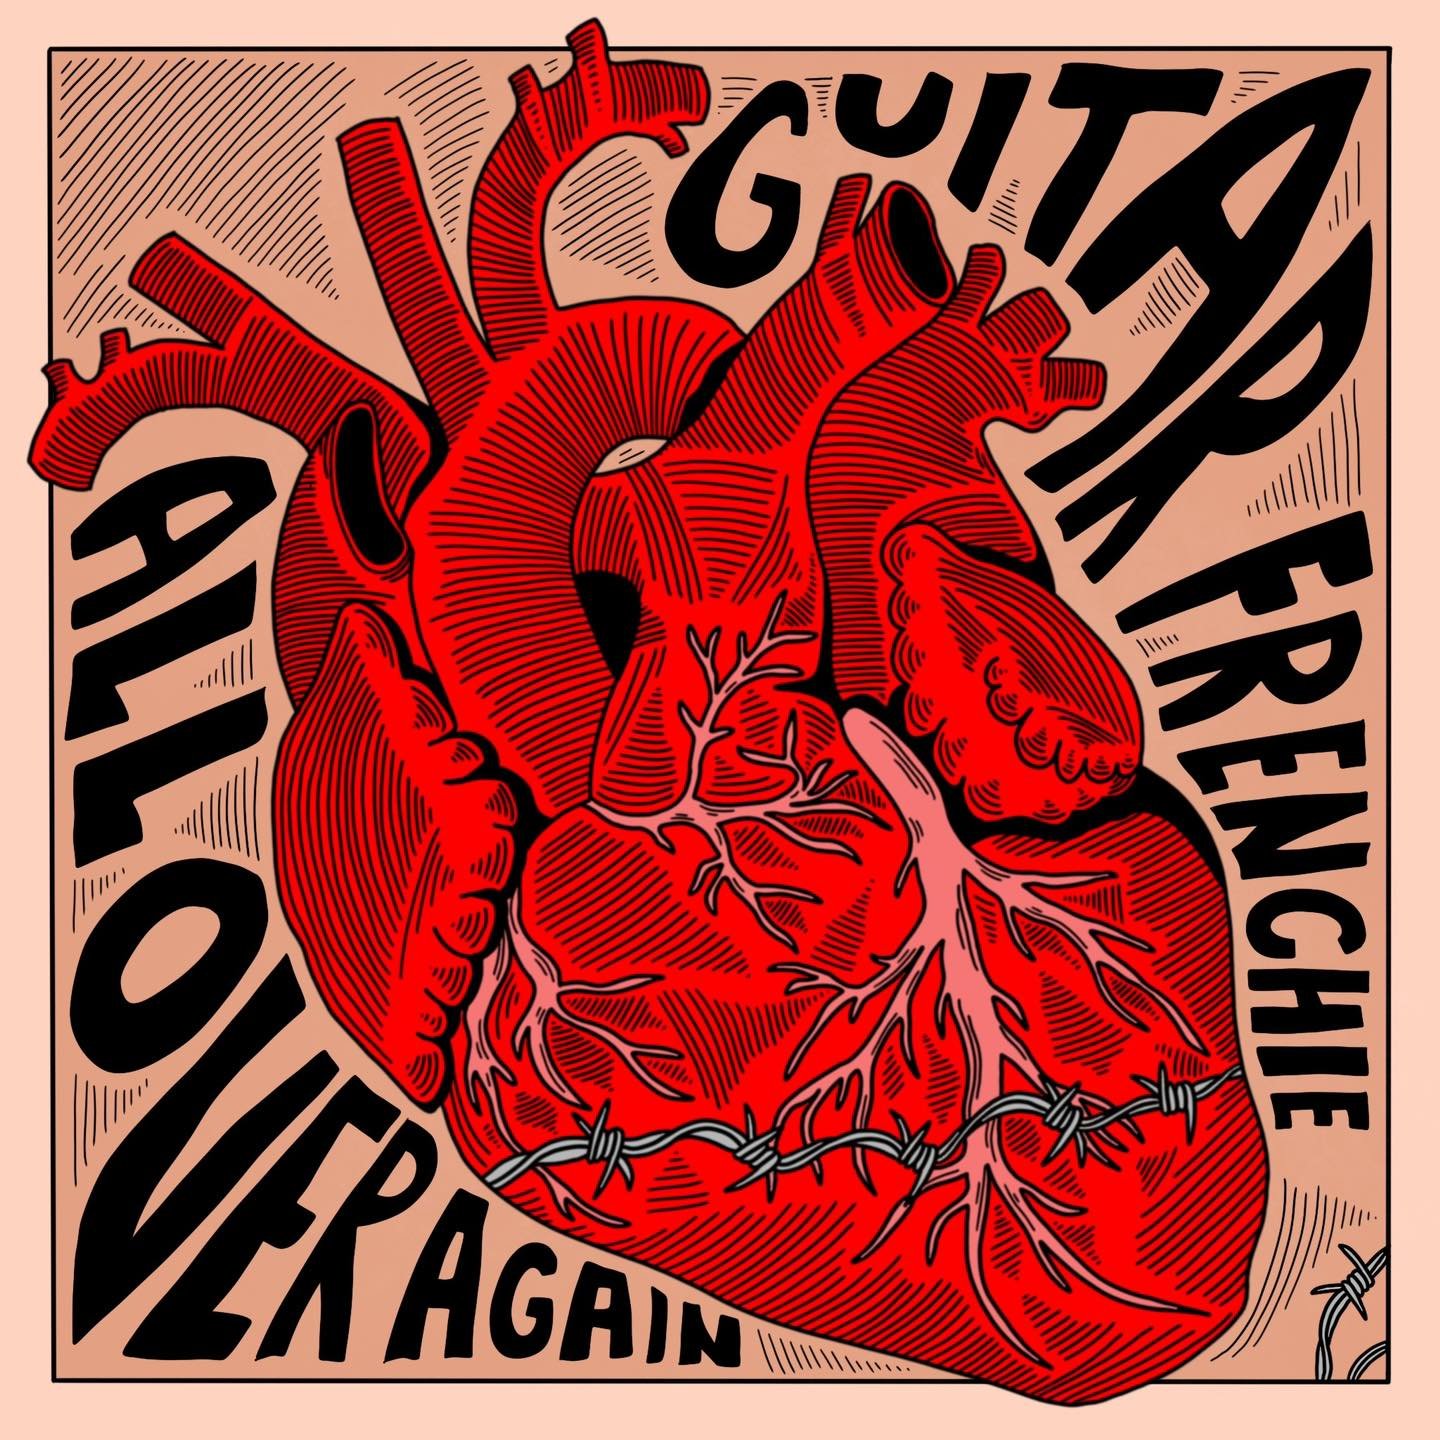 Guitar Frenchie "All Over Again" Single Art